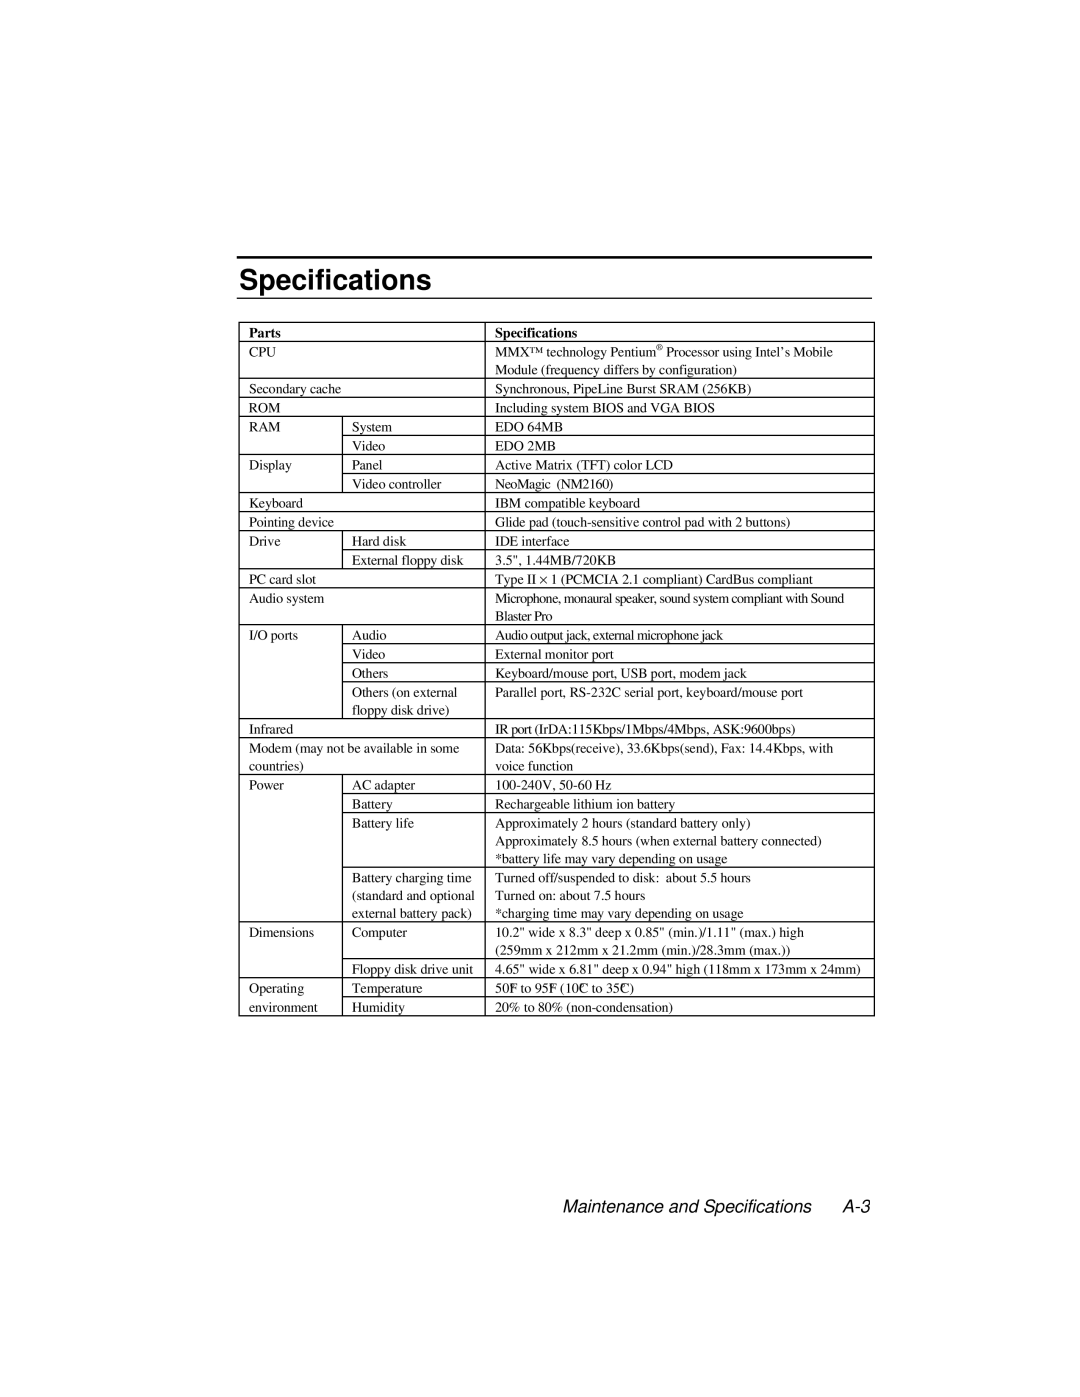 Dell LT System manual Parts Specifications 